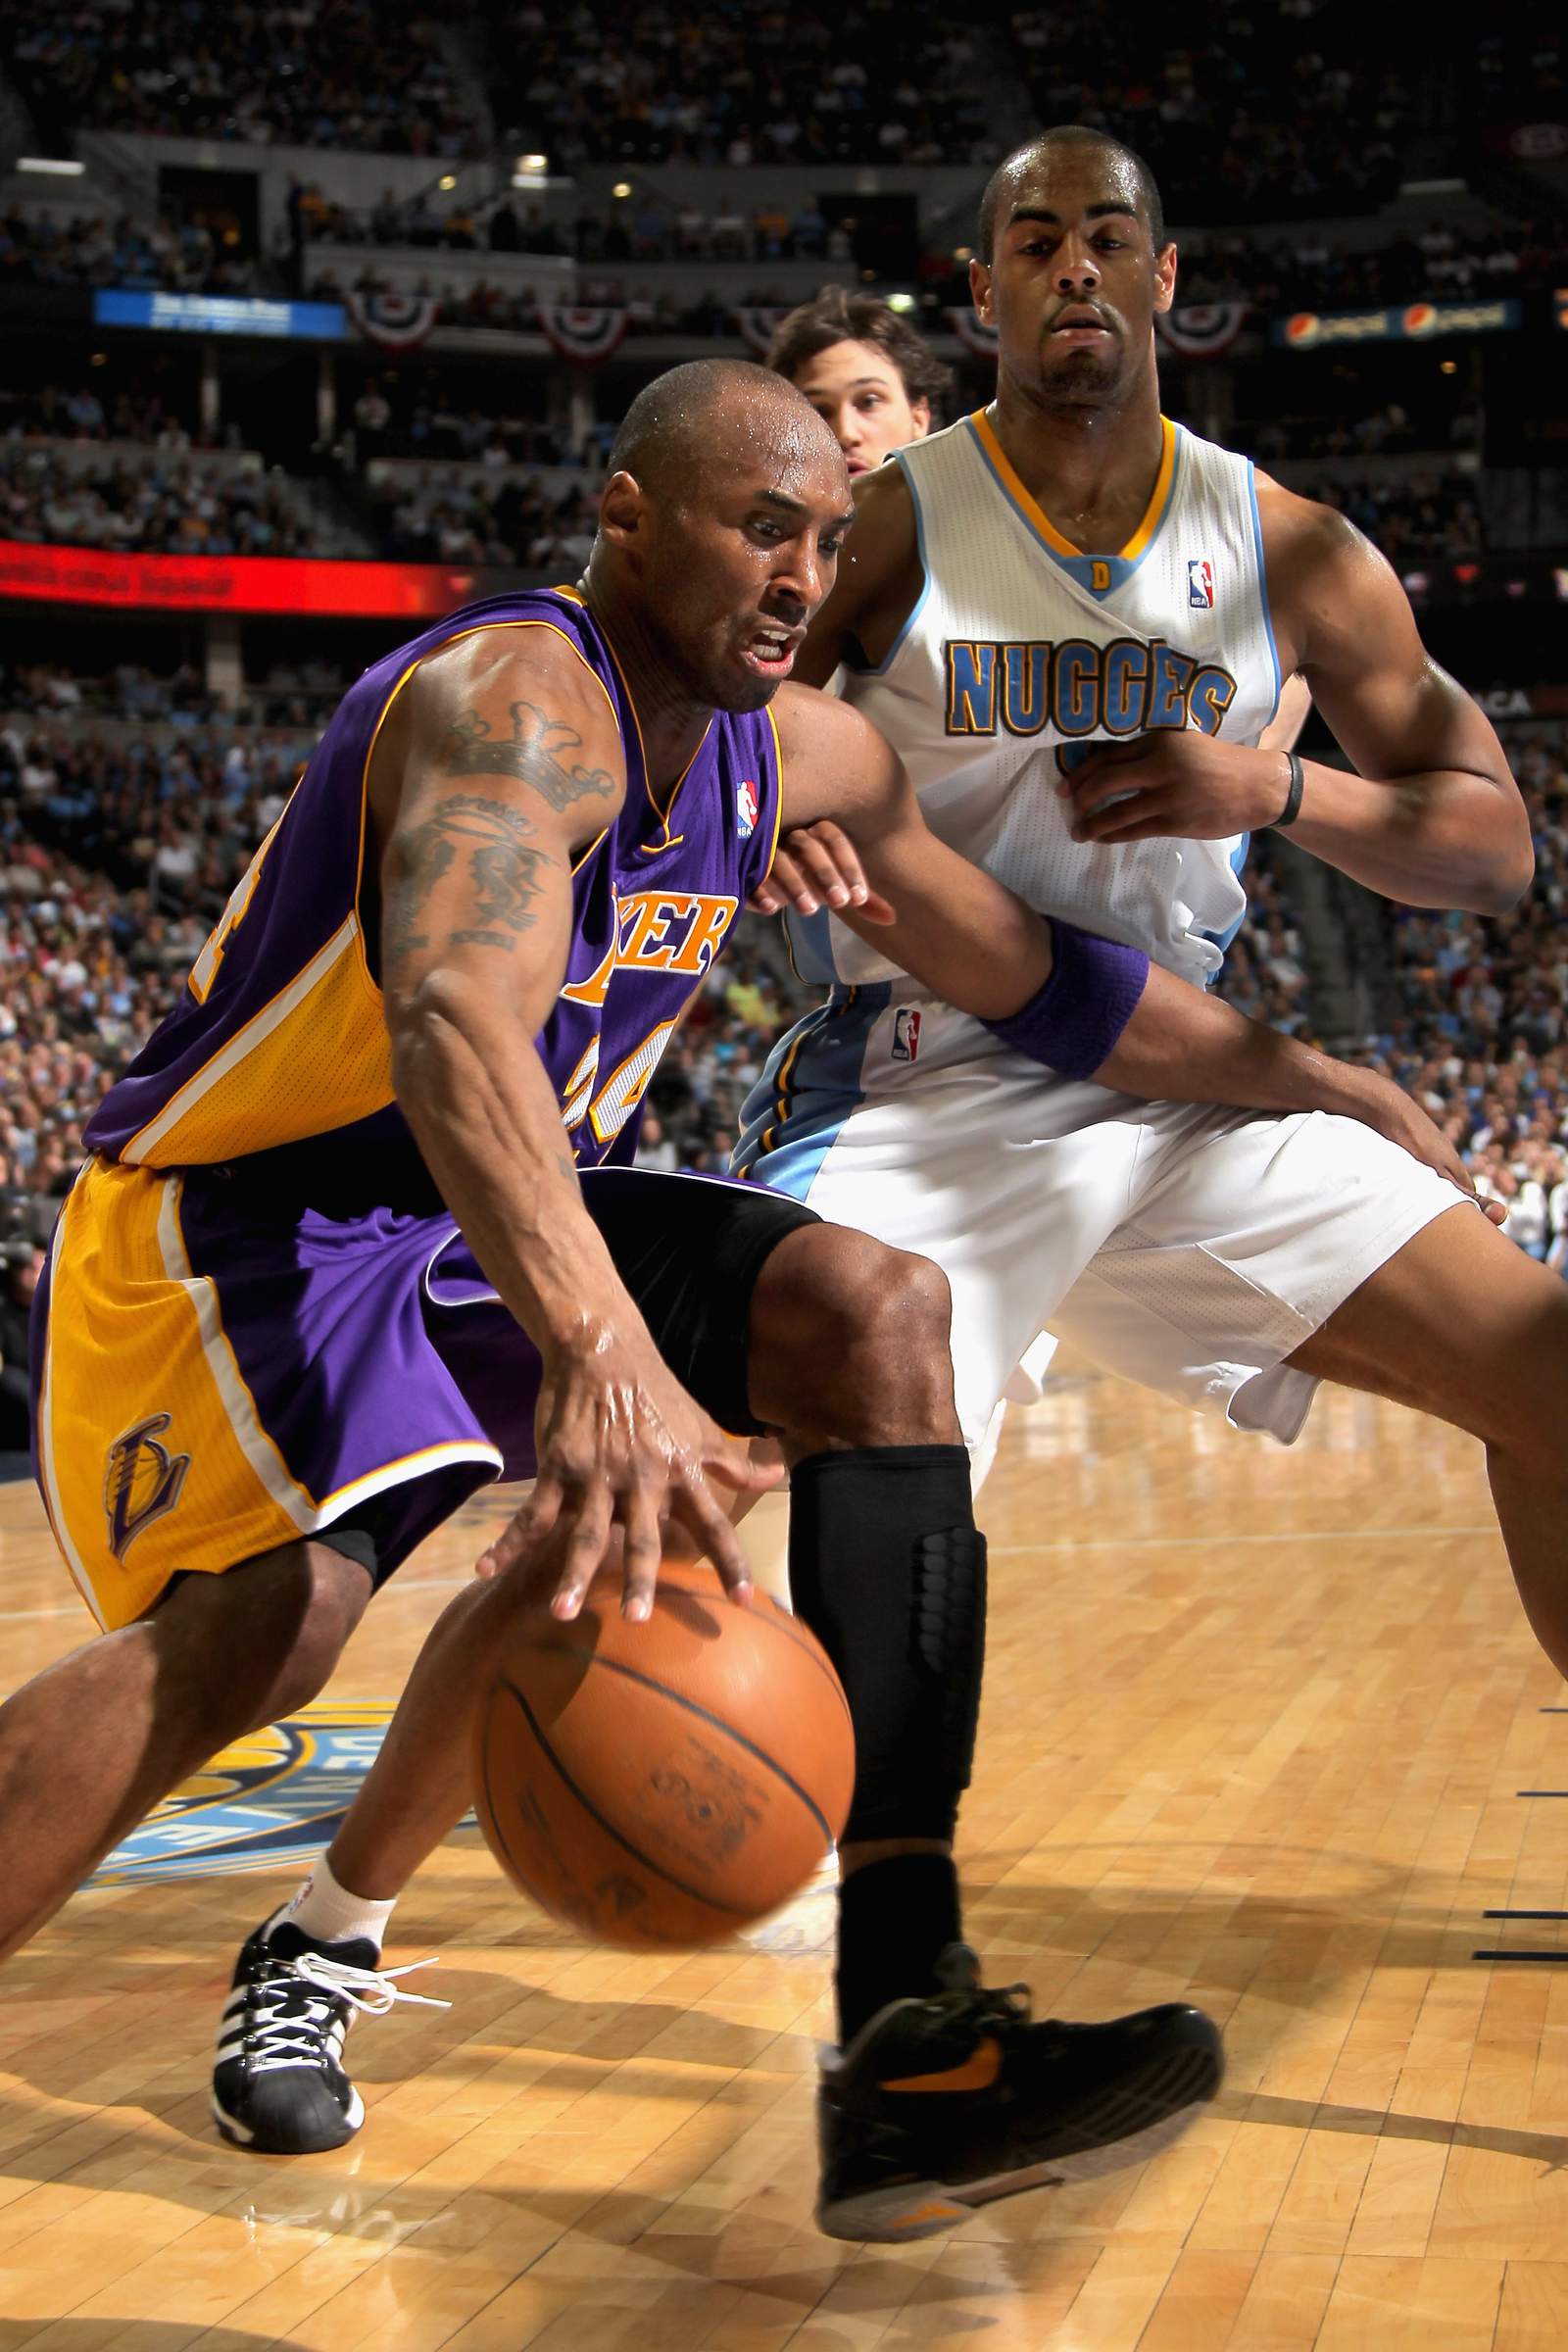 Kobe Bryant drives against Arron Afflalo of the Denver Nuggets in Game 4 of the Western Conference Quarterfinals in the 2012 NBA Playoffs at Pepsi Center.